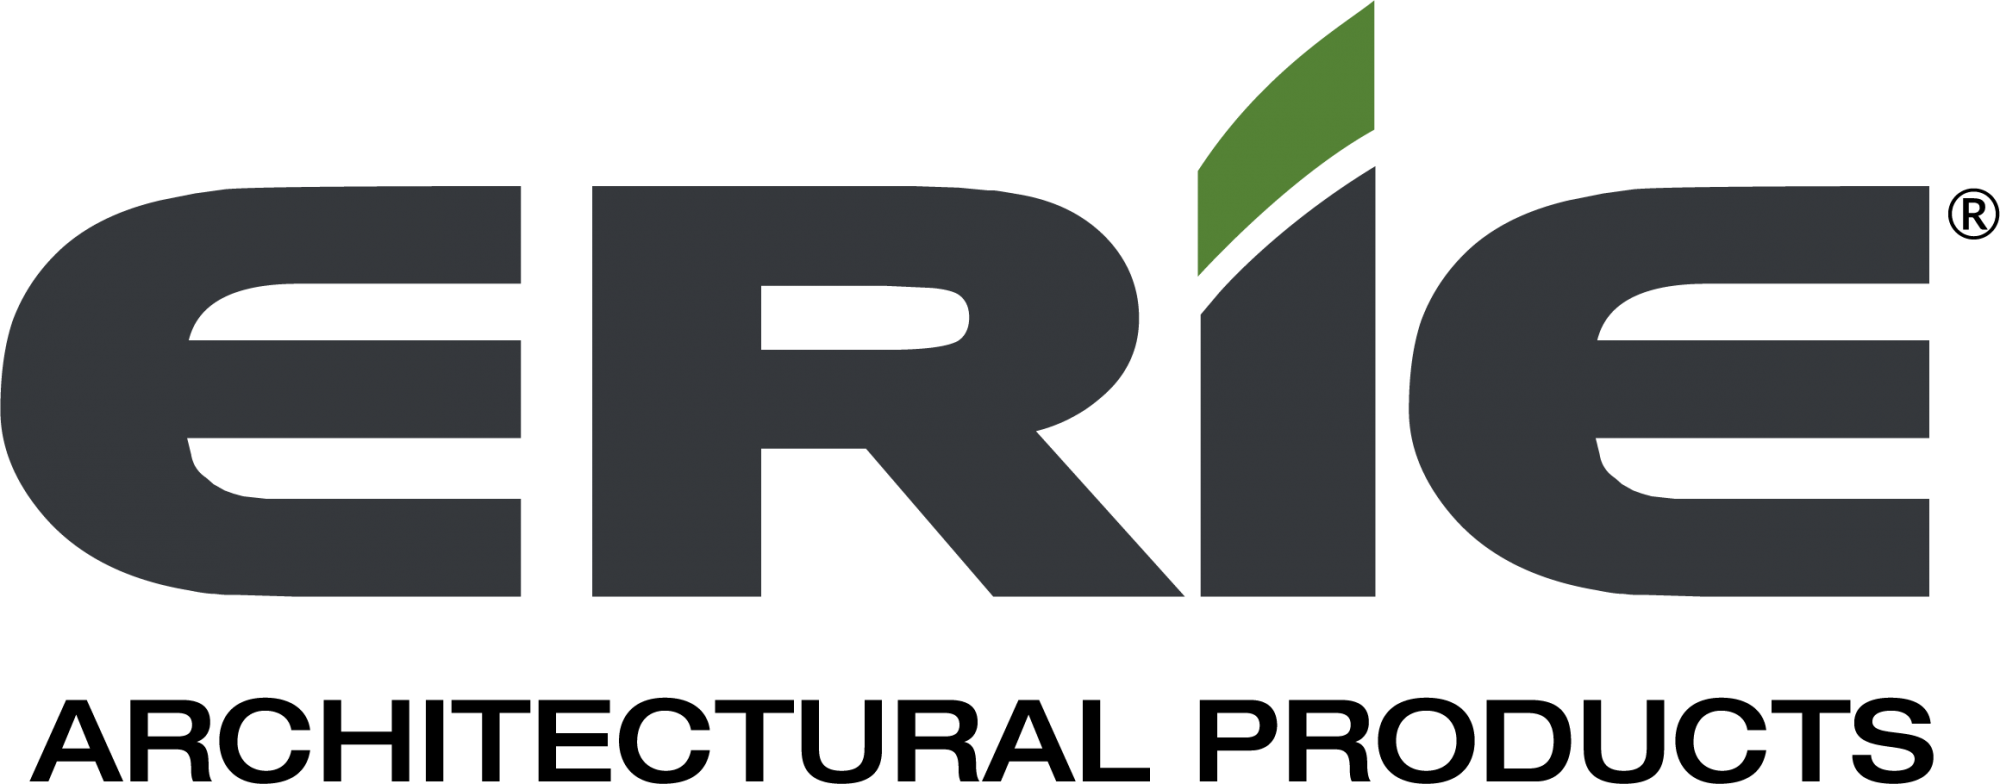 Erie Architectural Products logo